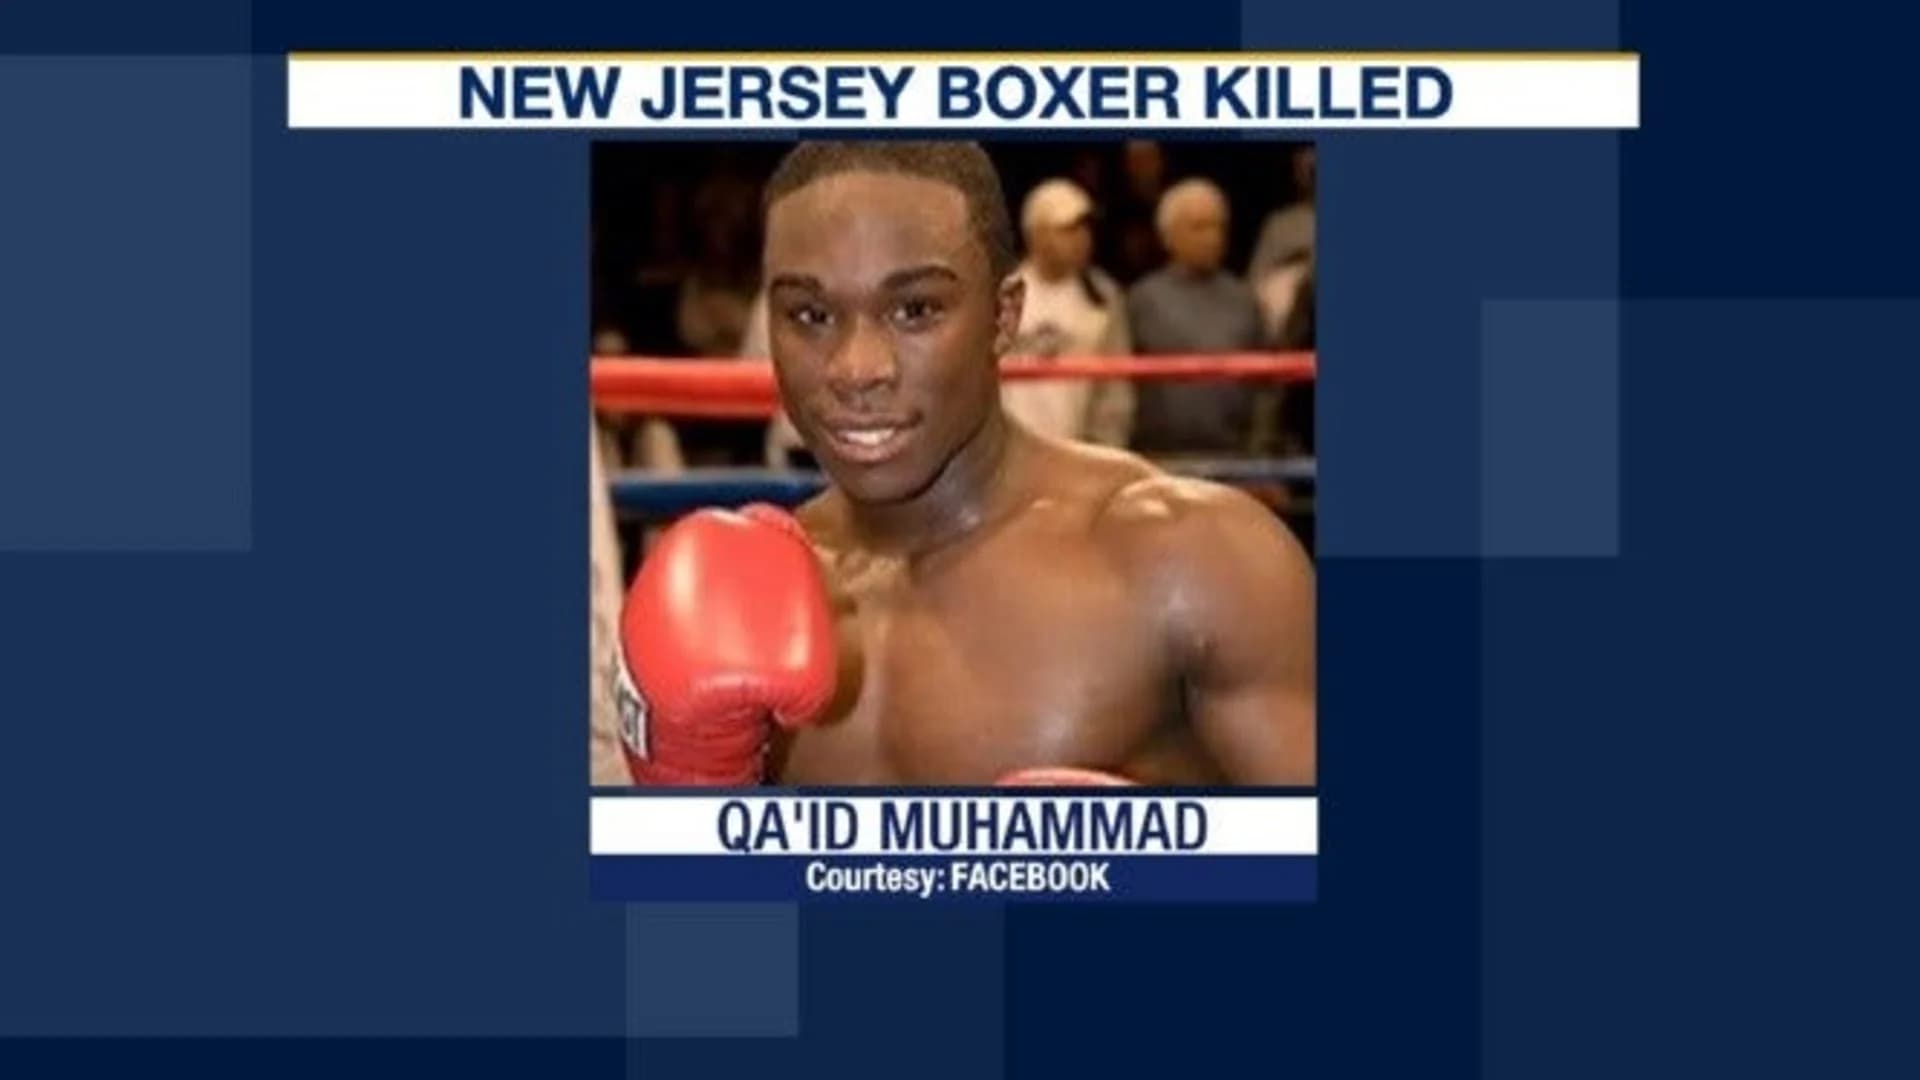 Man charged with murder of New Jersey up-and-coming boxer